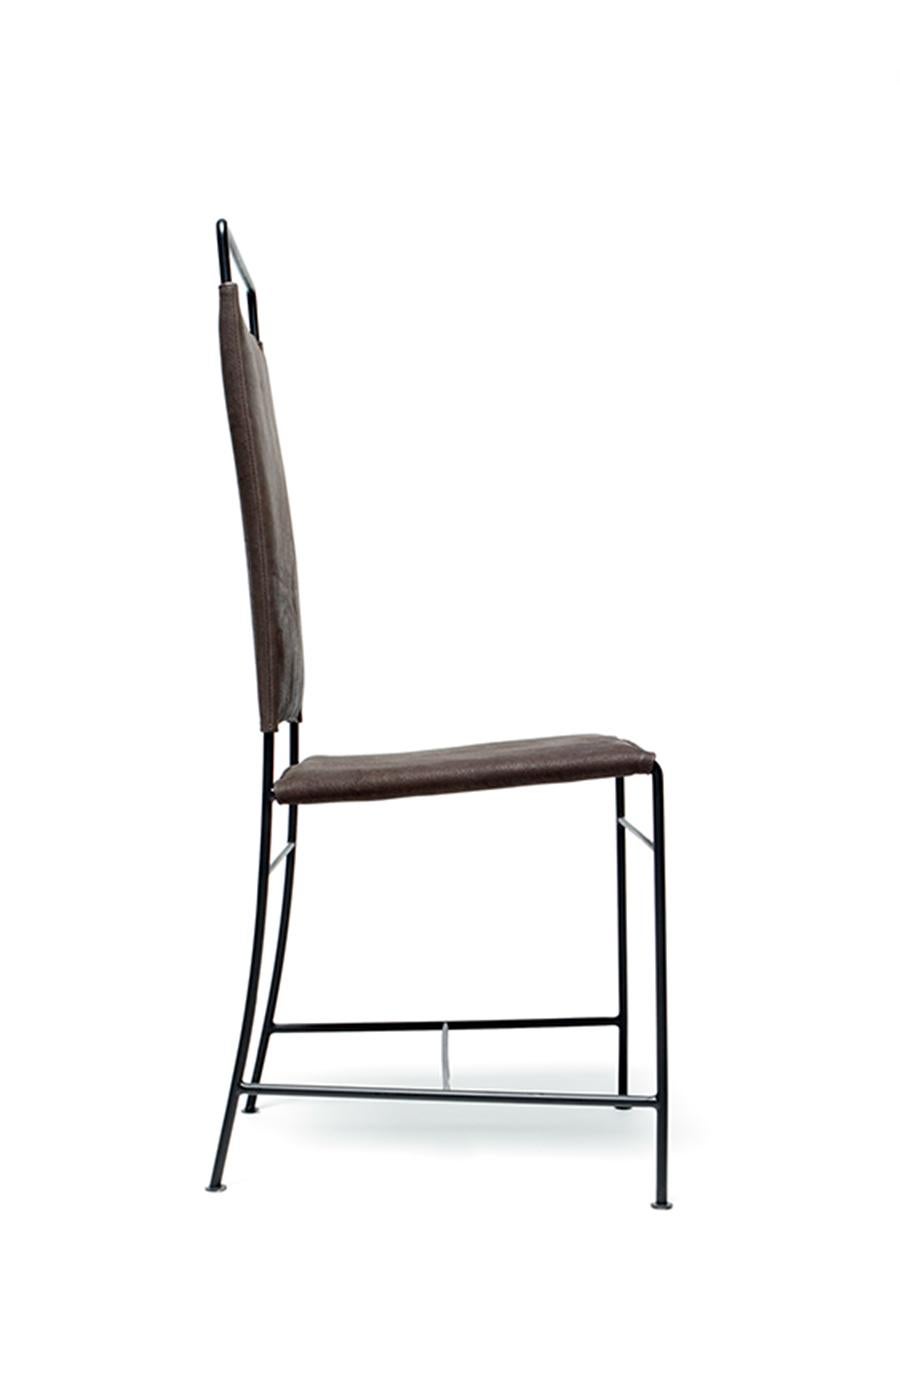 The 93° Chair features a steel frame with a tight upholstered seat and back.

Made to order and handcrafted in Germany. Available in brown leather. Metal frame available in blackened or stainless steel. 

COL and custom metal finish options also